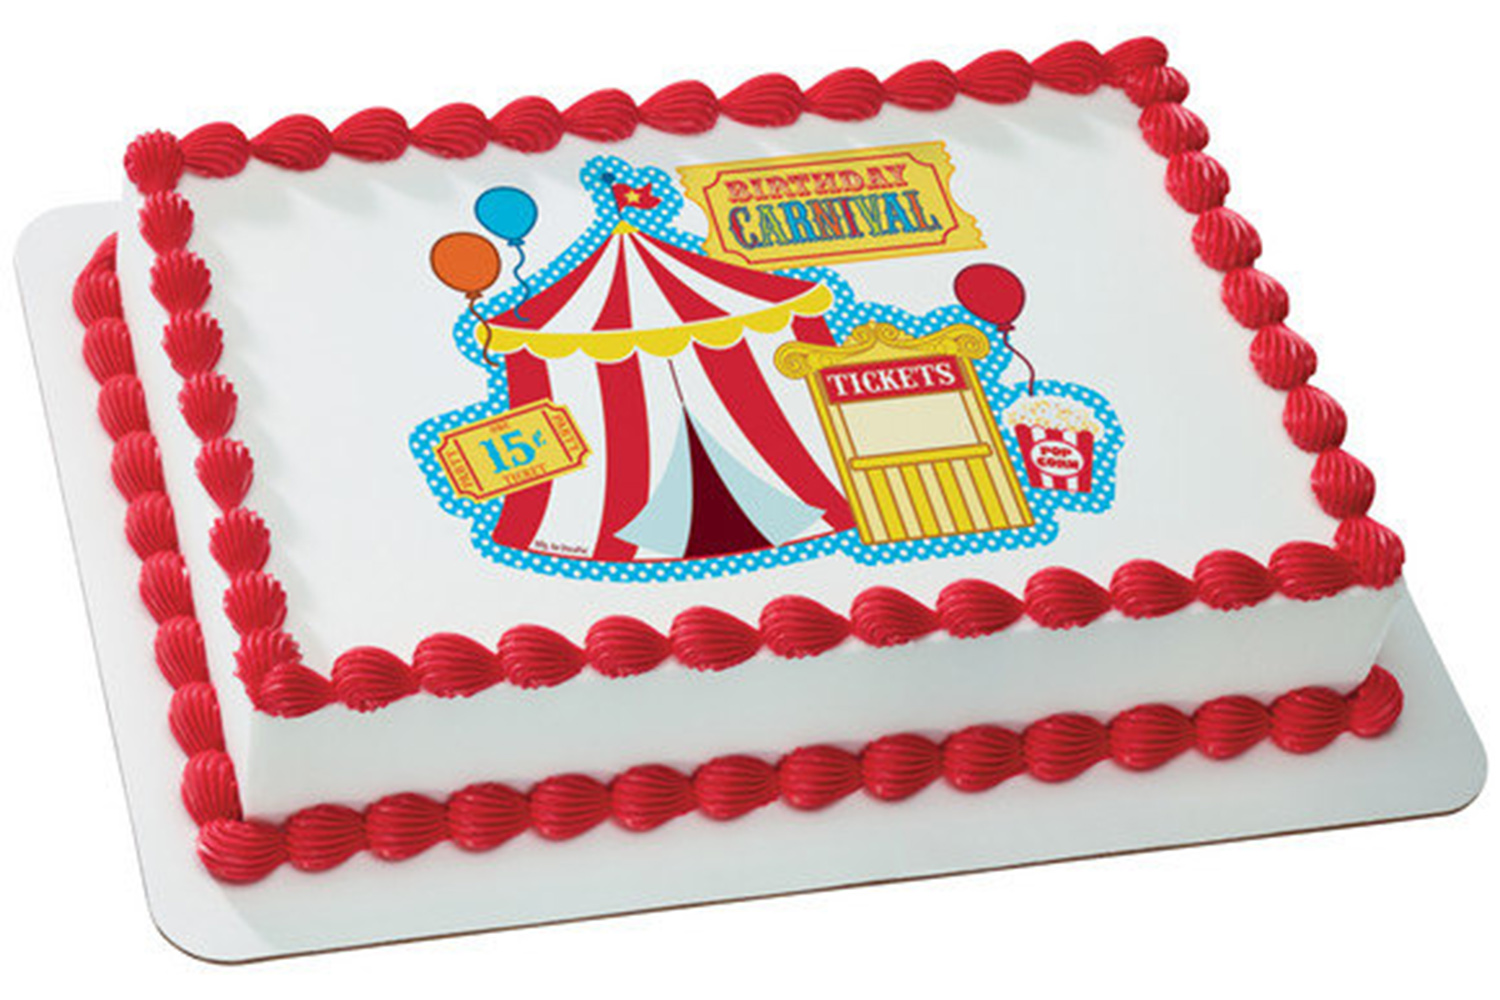 carnival party edible cake image